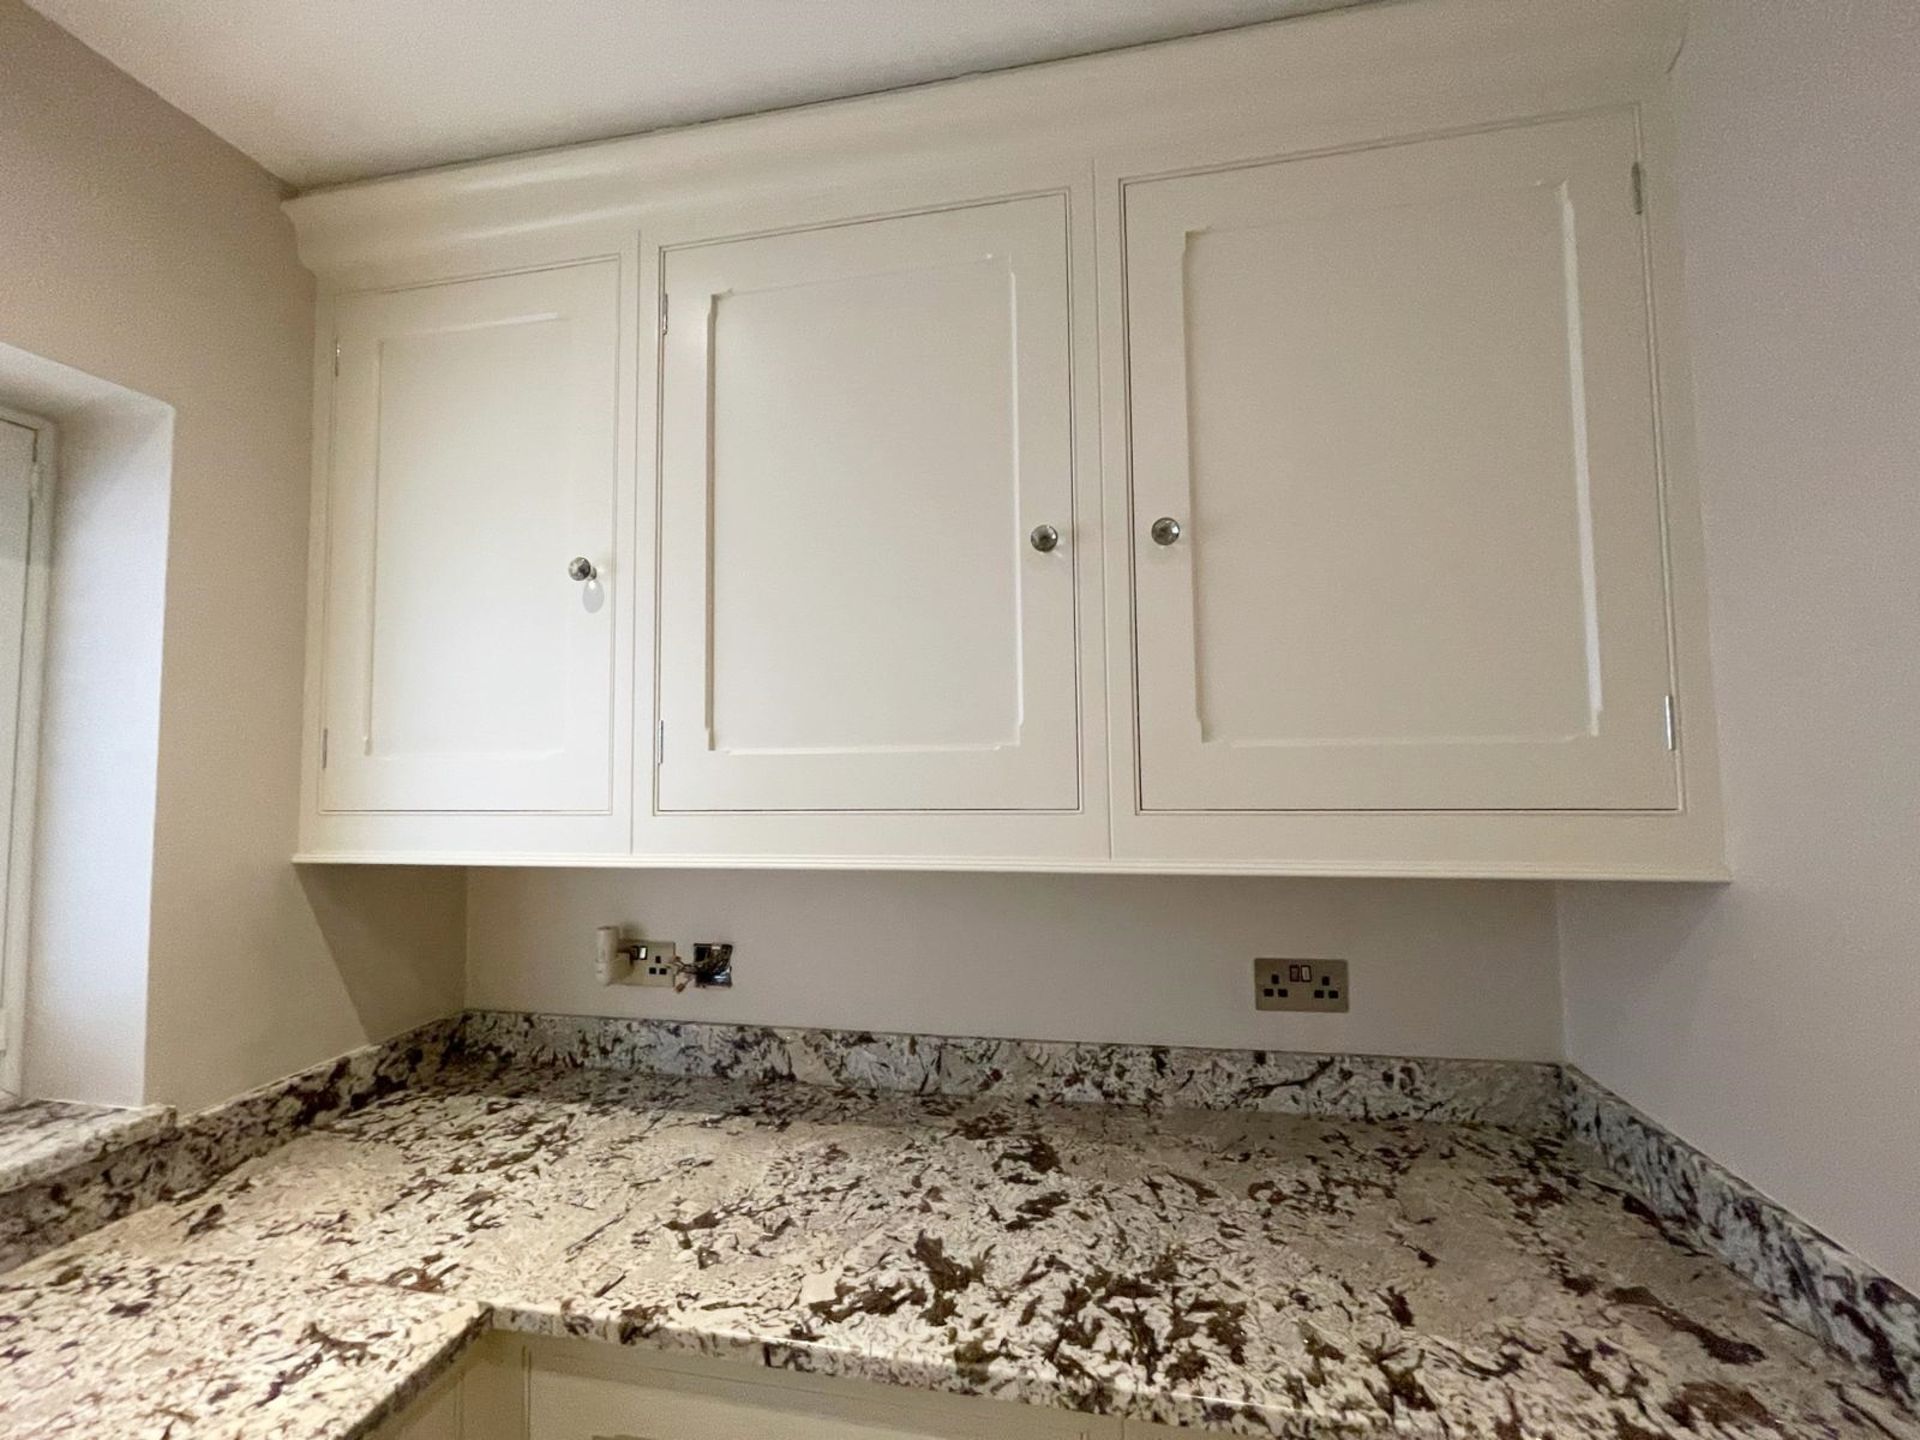 1 x Bespoke Fitted Solid Wood Kitchen with Natural Bianco Antico Grantite Work Surfaces - Image 6 of 61